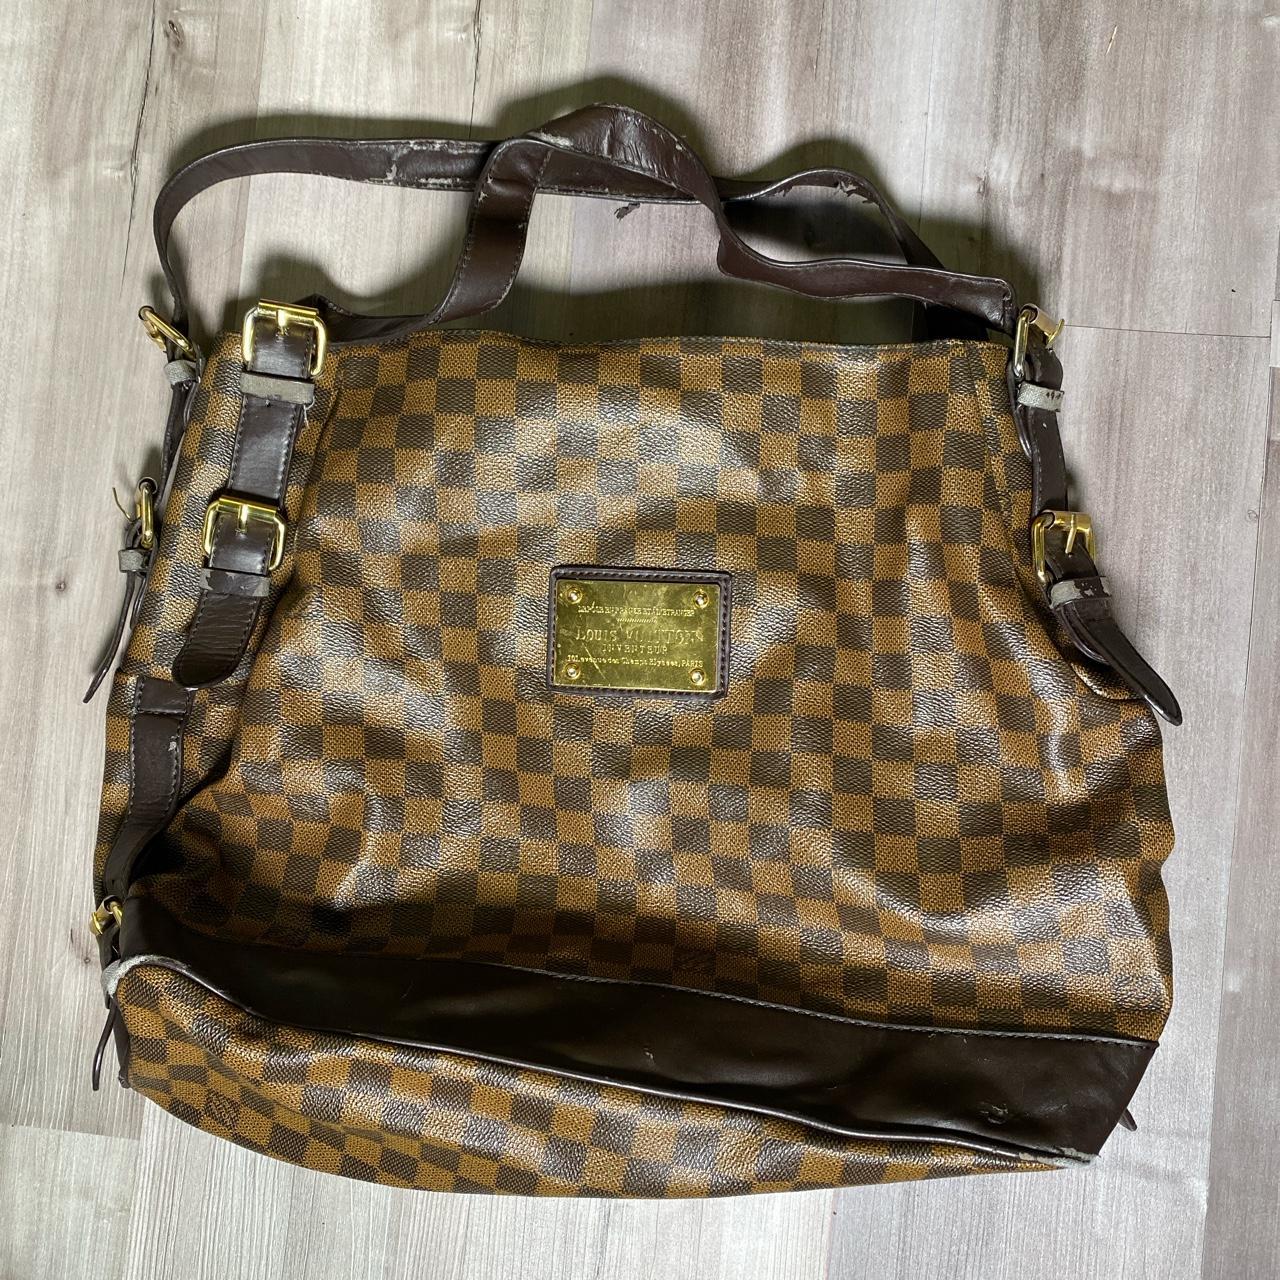 Large Louis Vuitton purse, ⭐️ All flaws are seen in